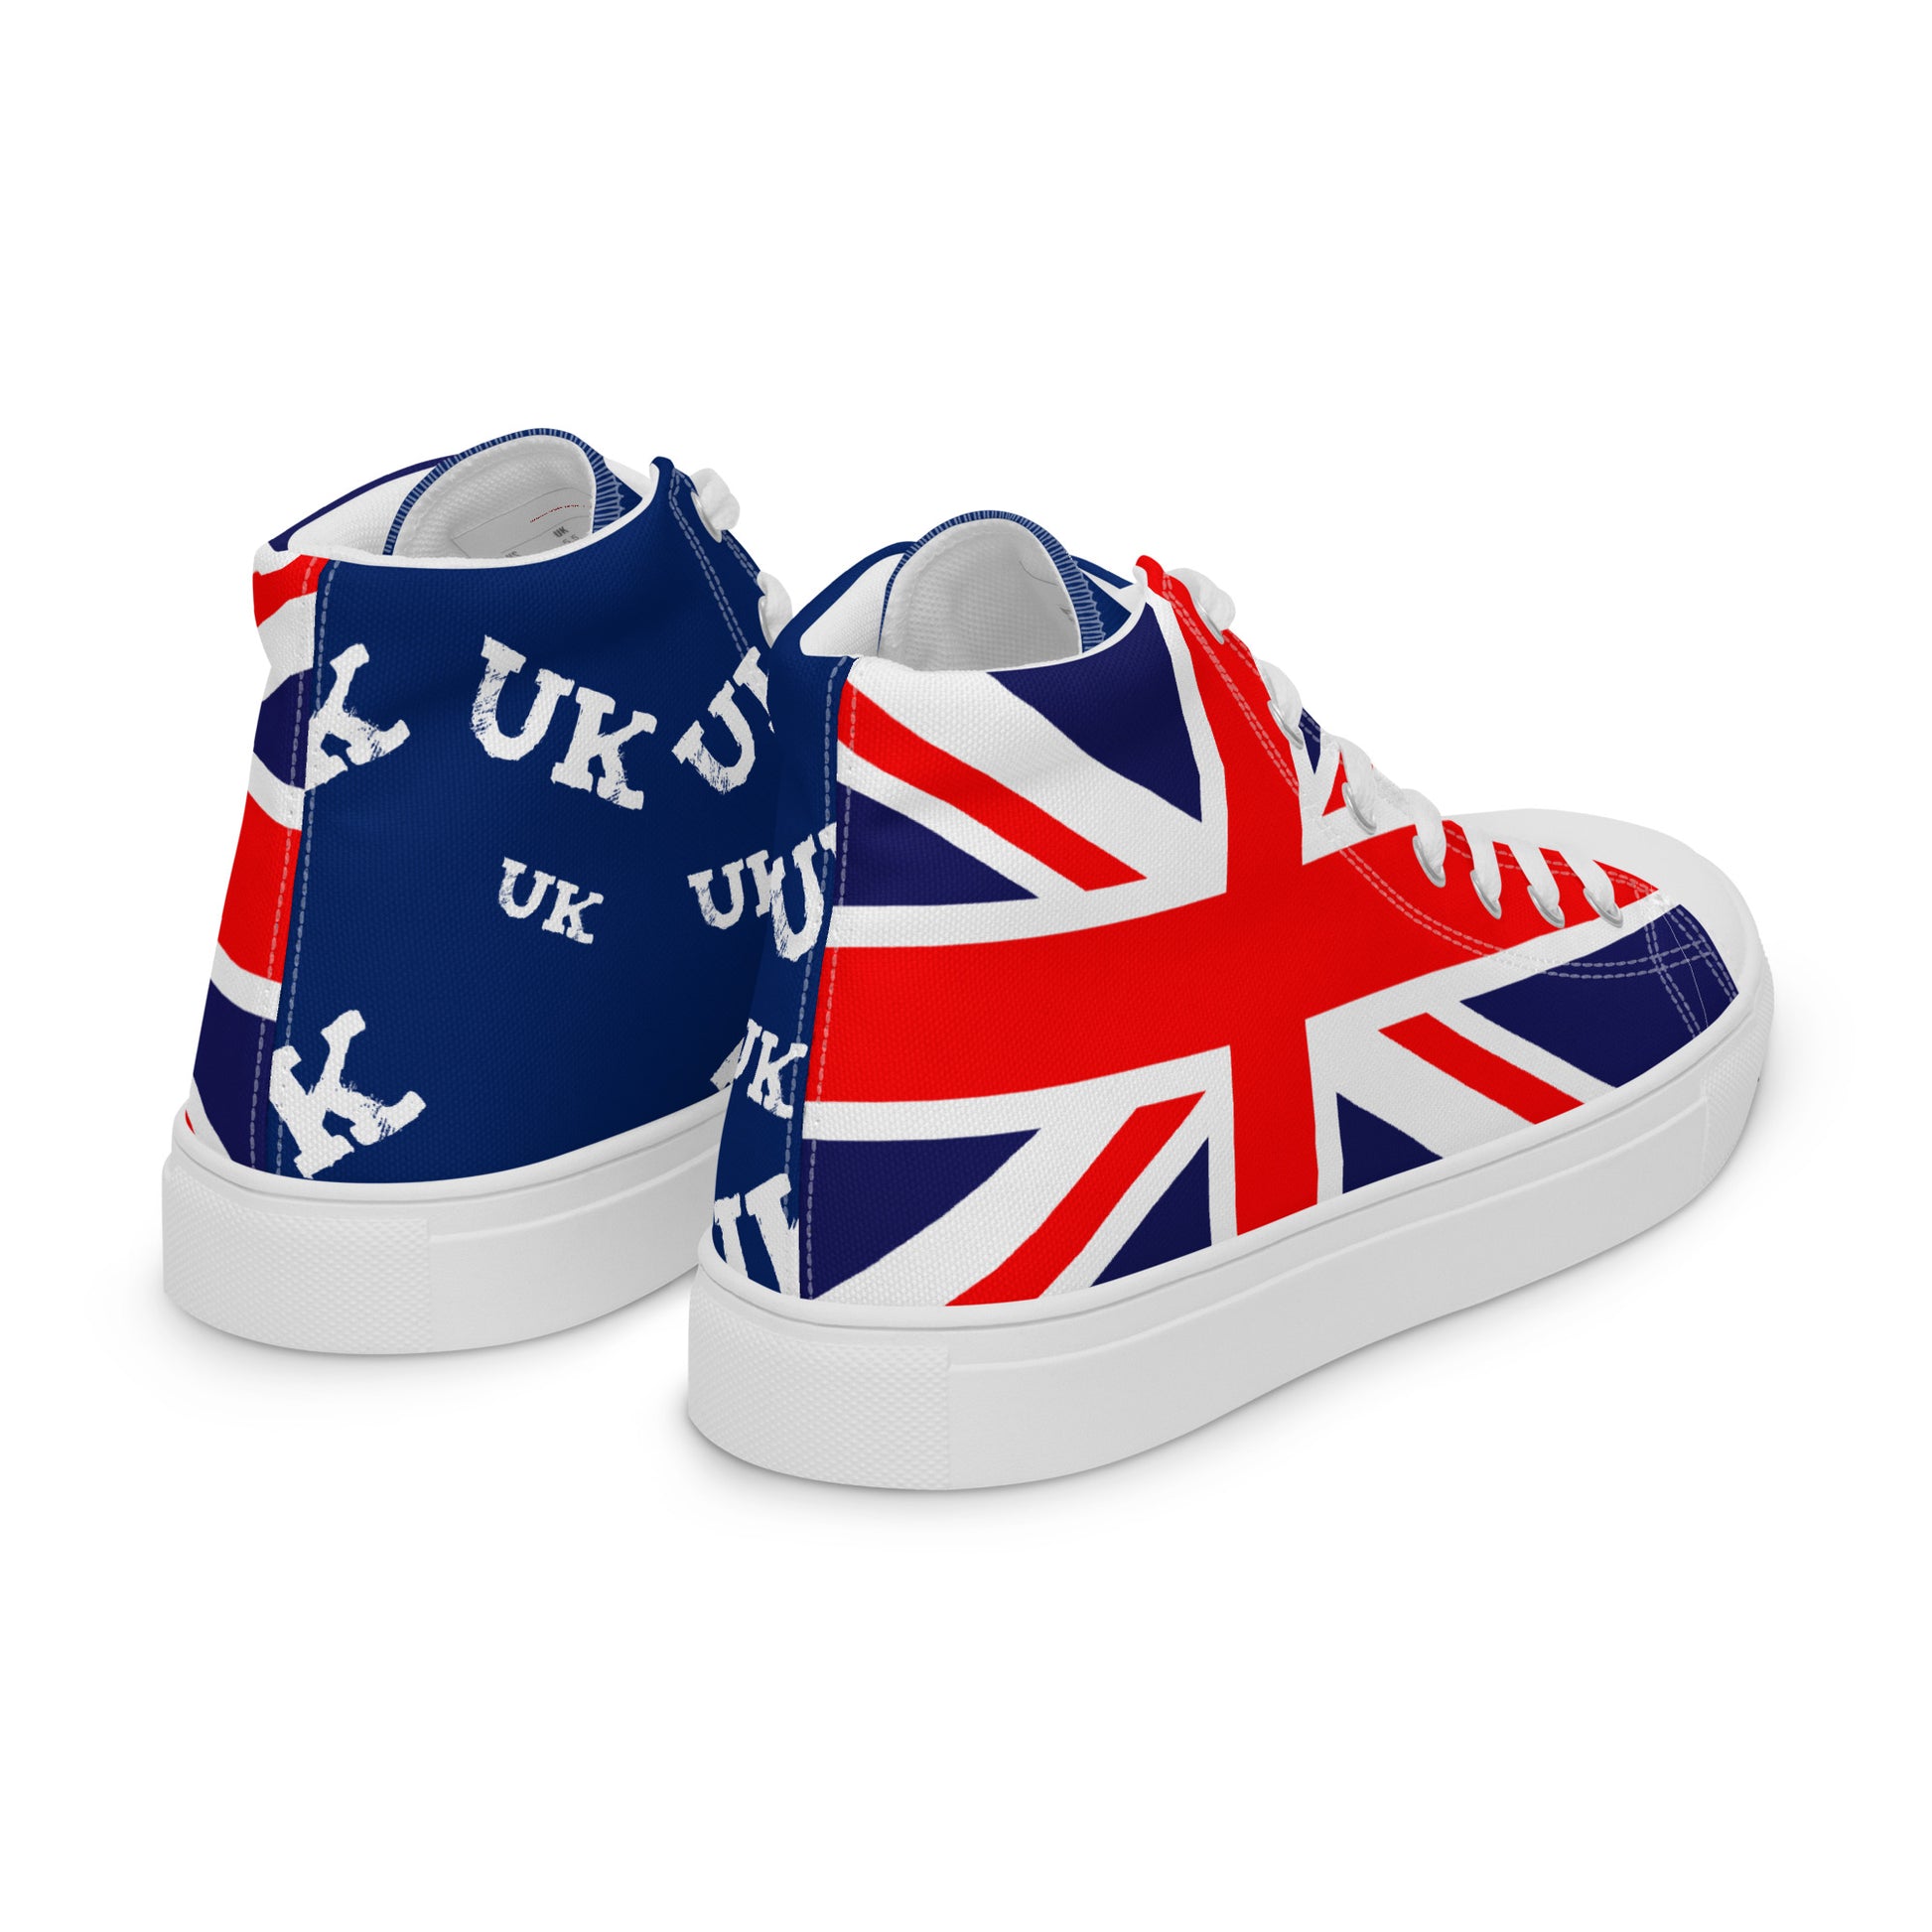 Back Side High Top Sneakers For Women / Union Jack Sneakers